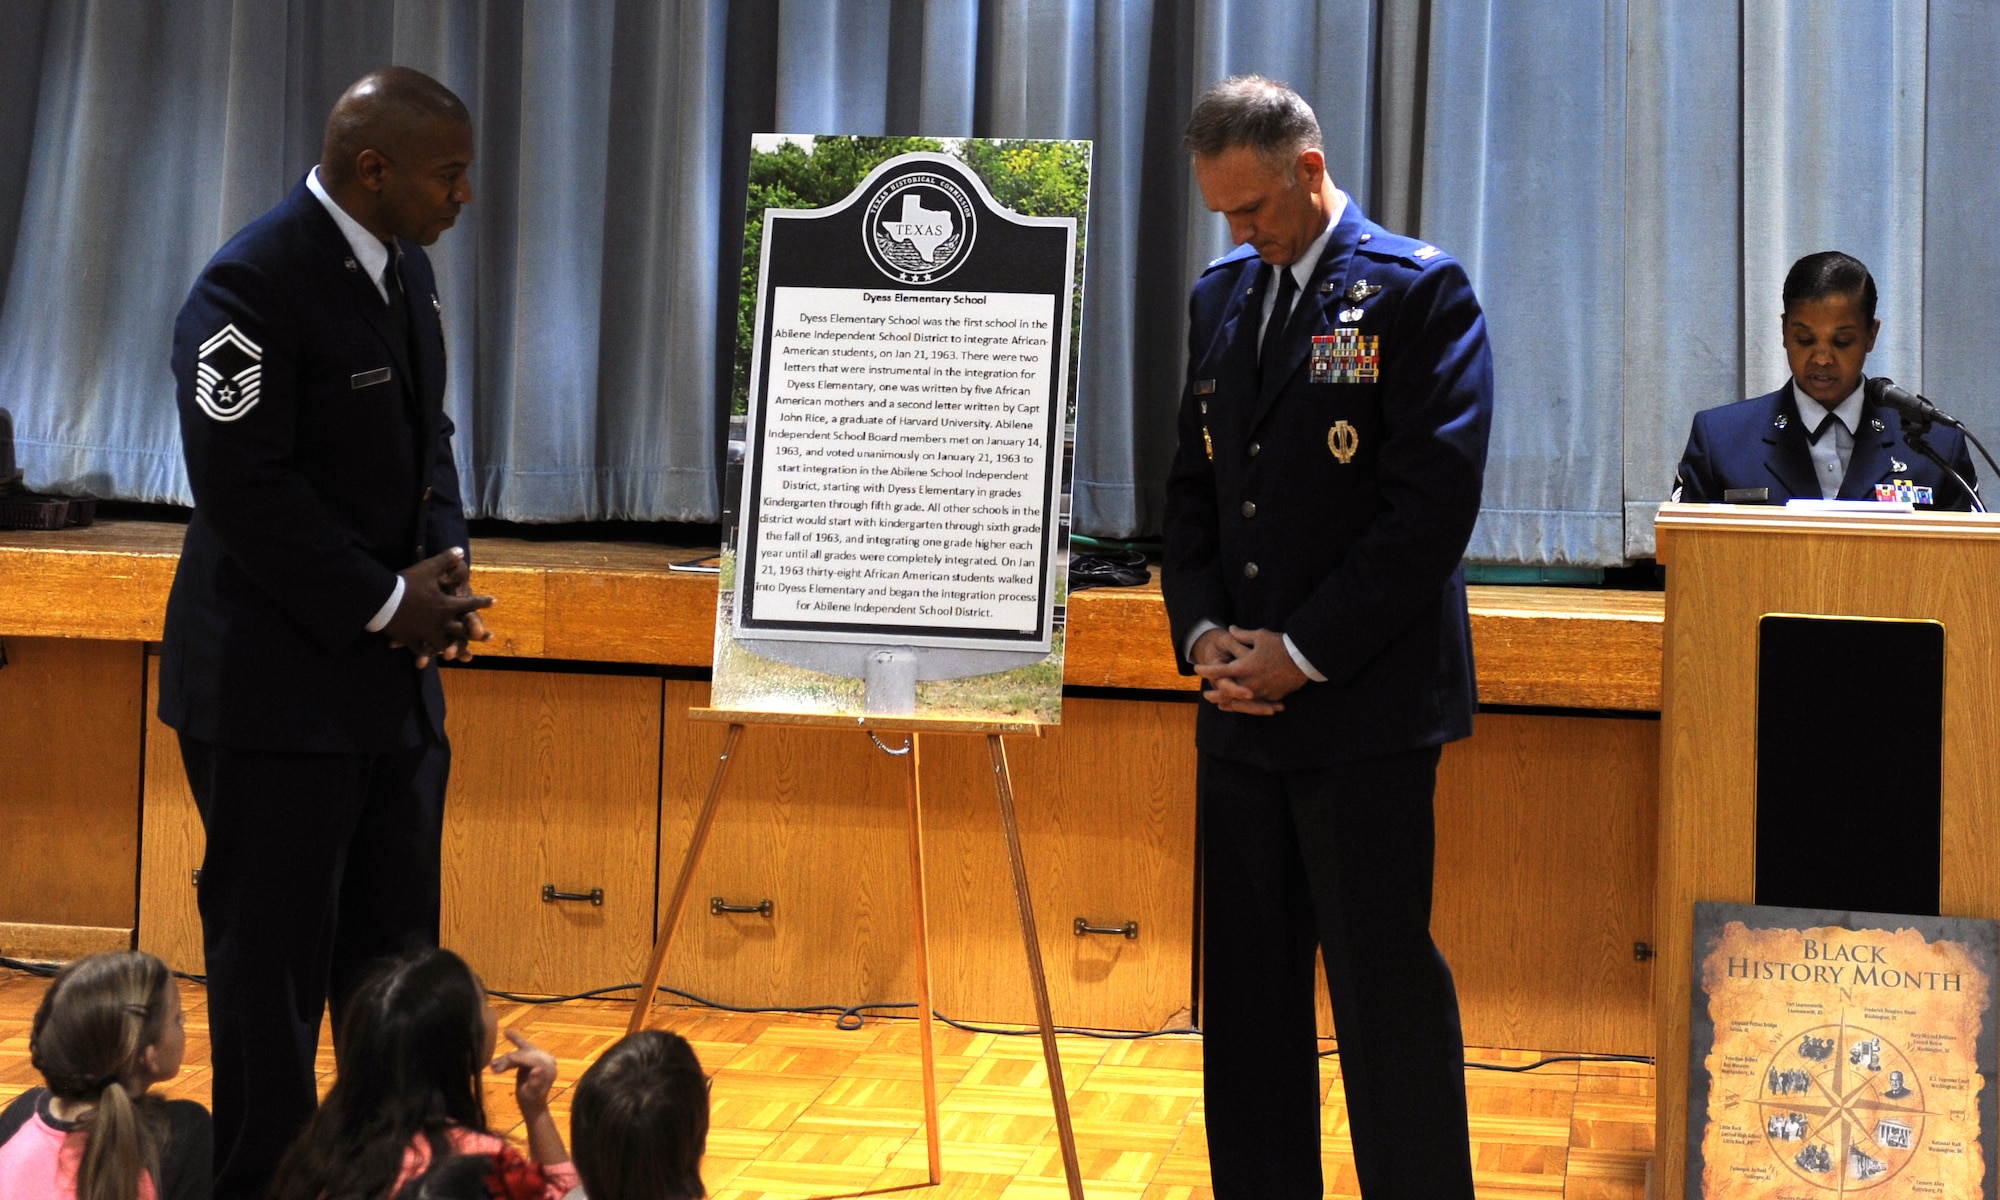 U.S. Air Force Col. Michael Miller, right, 7th Bomb Wing vice commander and Senior Master Sgt. Tremayne Hubbard, Dyess African-American Heritage committee president, unveil a historical marker Feb. 22, 2016, at Dyess Elementary in Abilene, Texas. In January 2015, Hubbard started researching integration in the Abilene Independent School District and applied for a historical marker to be placed at the elementary since it was the first school in Abilene ISD to become racially integrated in 1963. (U.S. Air Force photo by Senior Airman Shannon Hall/Released)